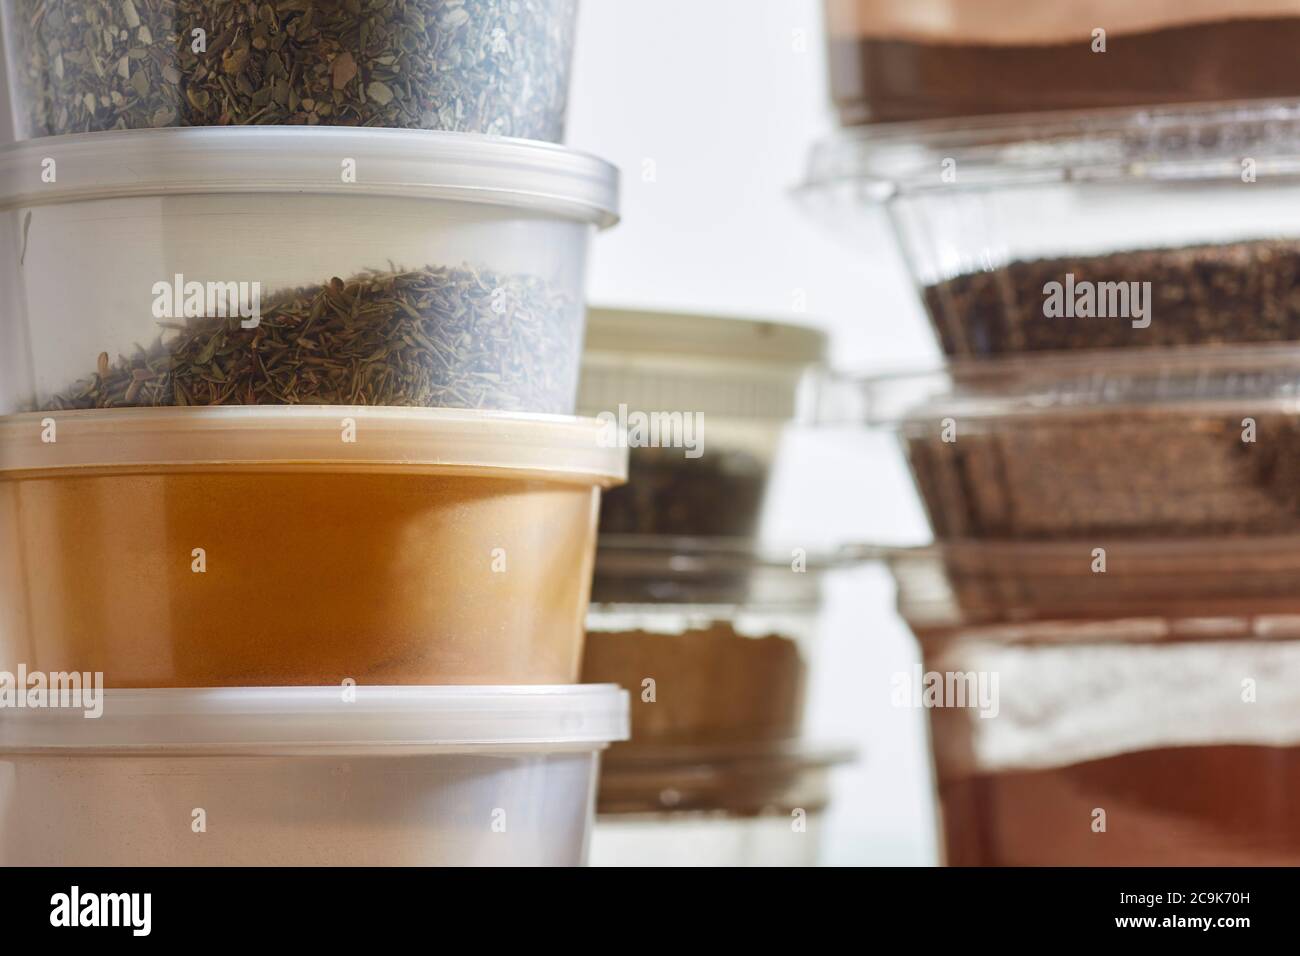 Amish bulk food items. Spices are packed in plastic containers at Amish bulk food stores in Pennsylvania, USA Stock Photo